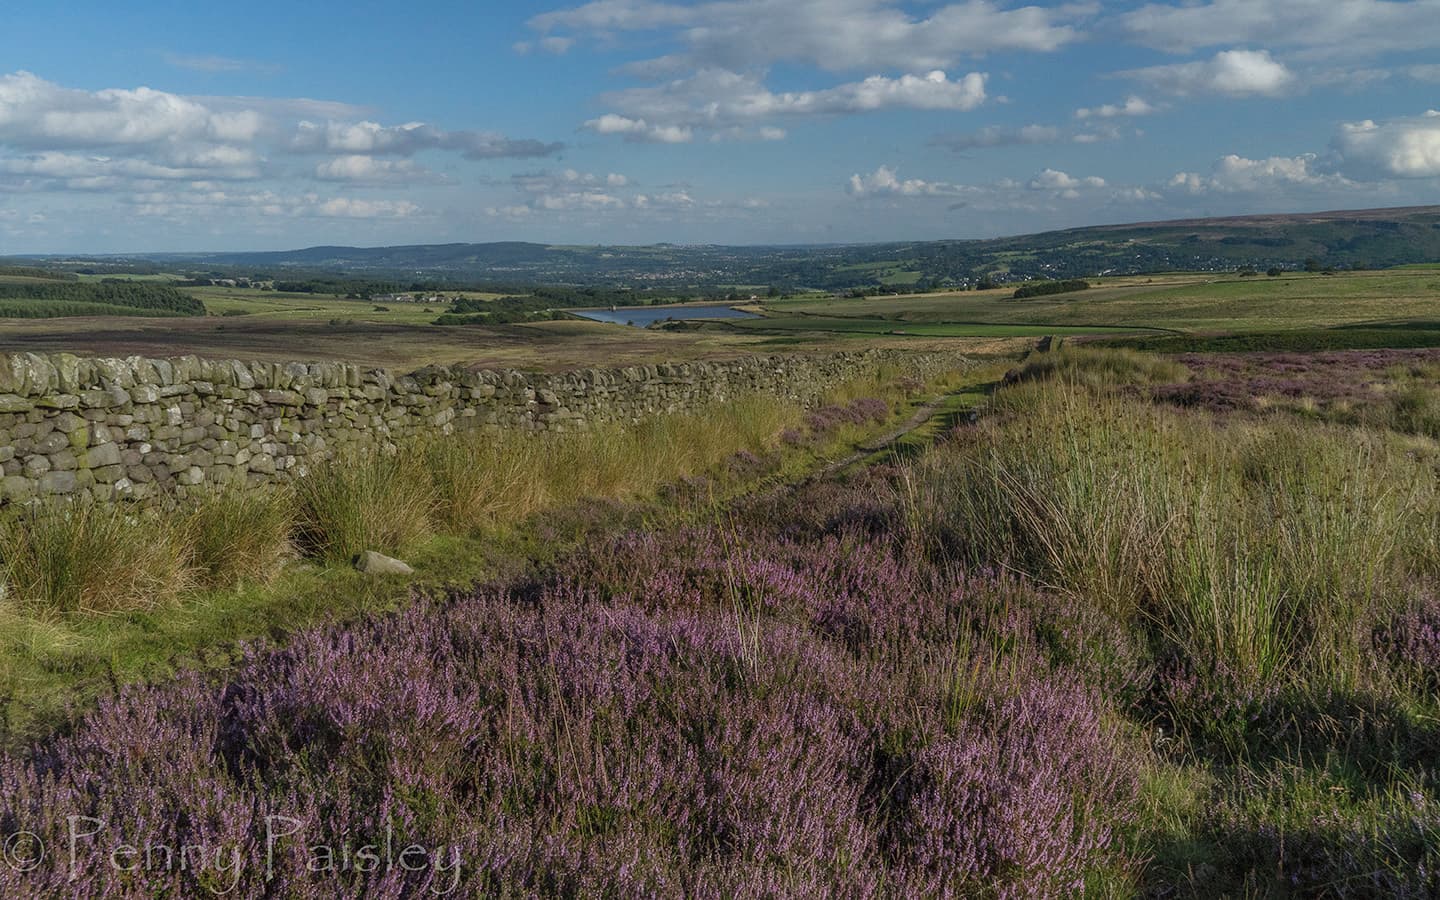 Nidderdale NL - March Ghyll Heather Moorland (c) Penny Paisley